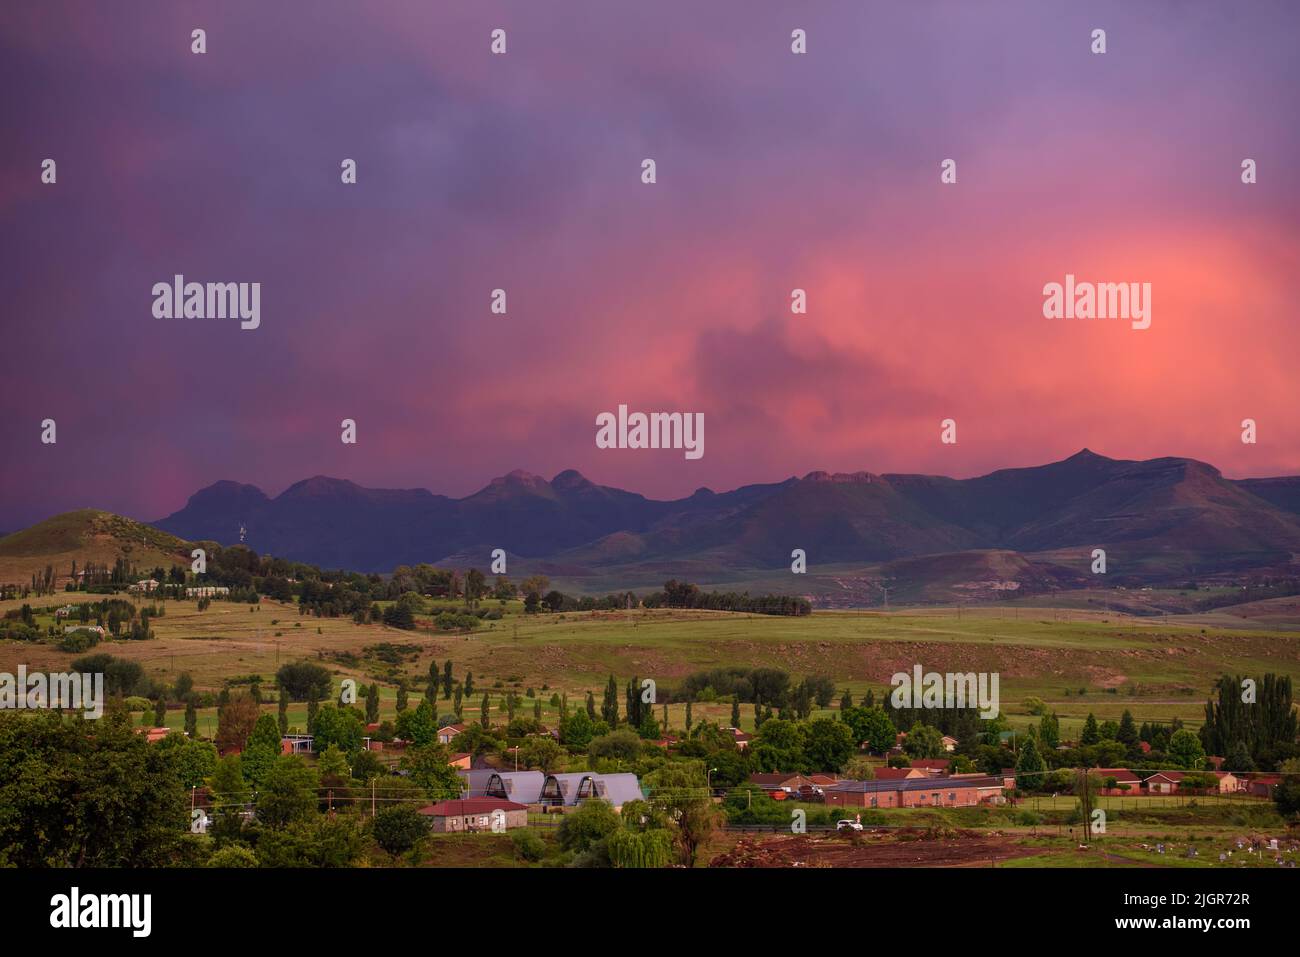 A view of the mountains at sunset from Clarens town in the Free State, South Africa, near the Golden Gate Highlands National Park Stock Photo